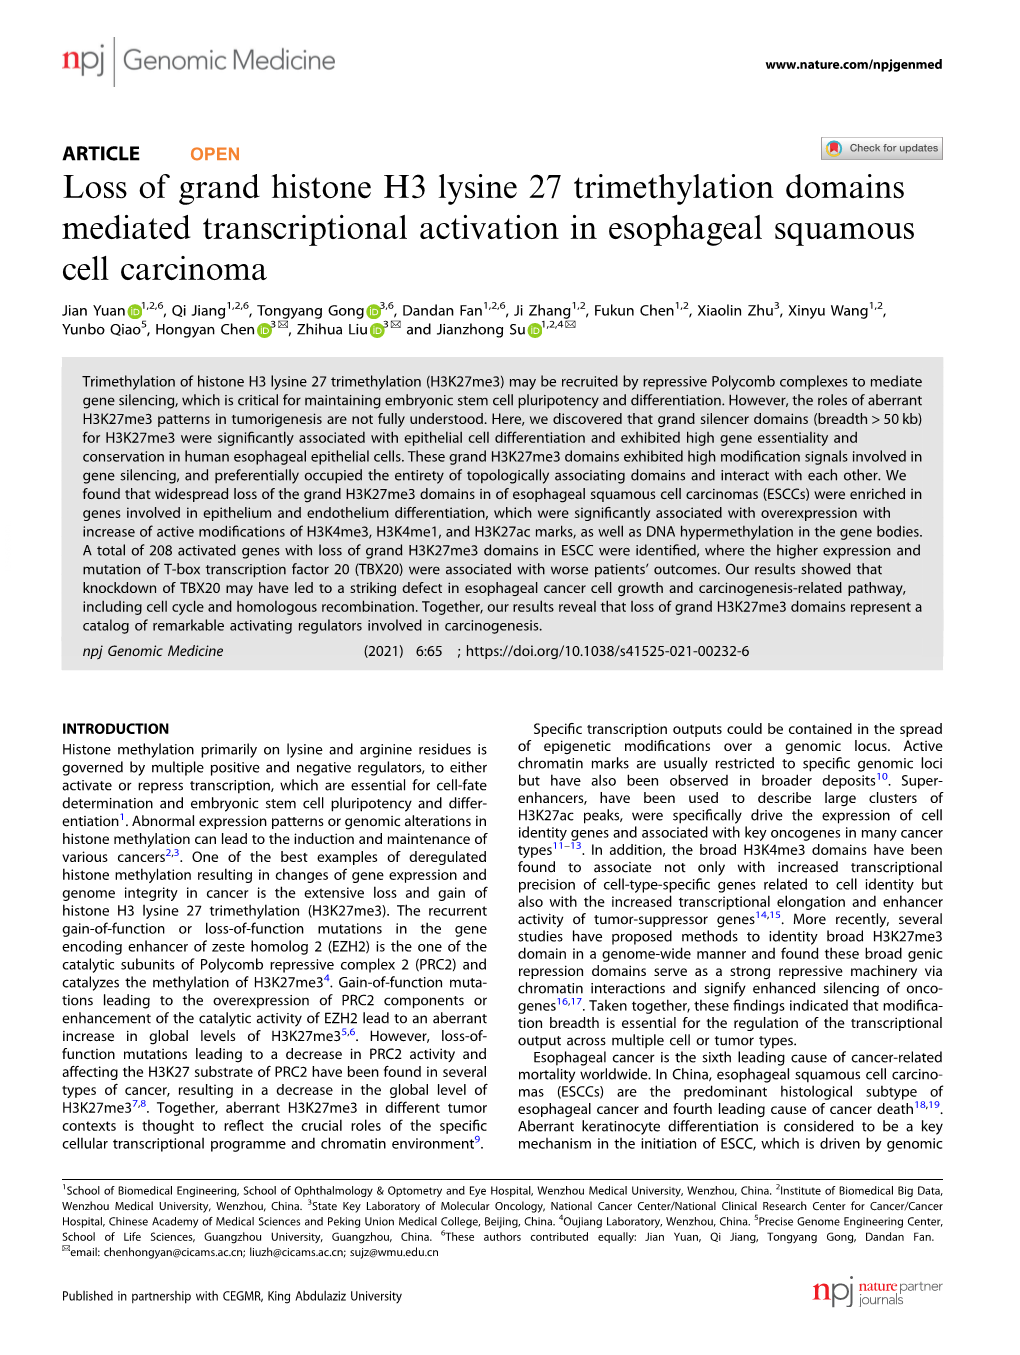 Loss of Grand Histone H3 Lysine 27 Trimethylation Domains Mediated Transcriptional Activation in Esophageal Squamous Cell Carcinoma